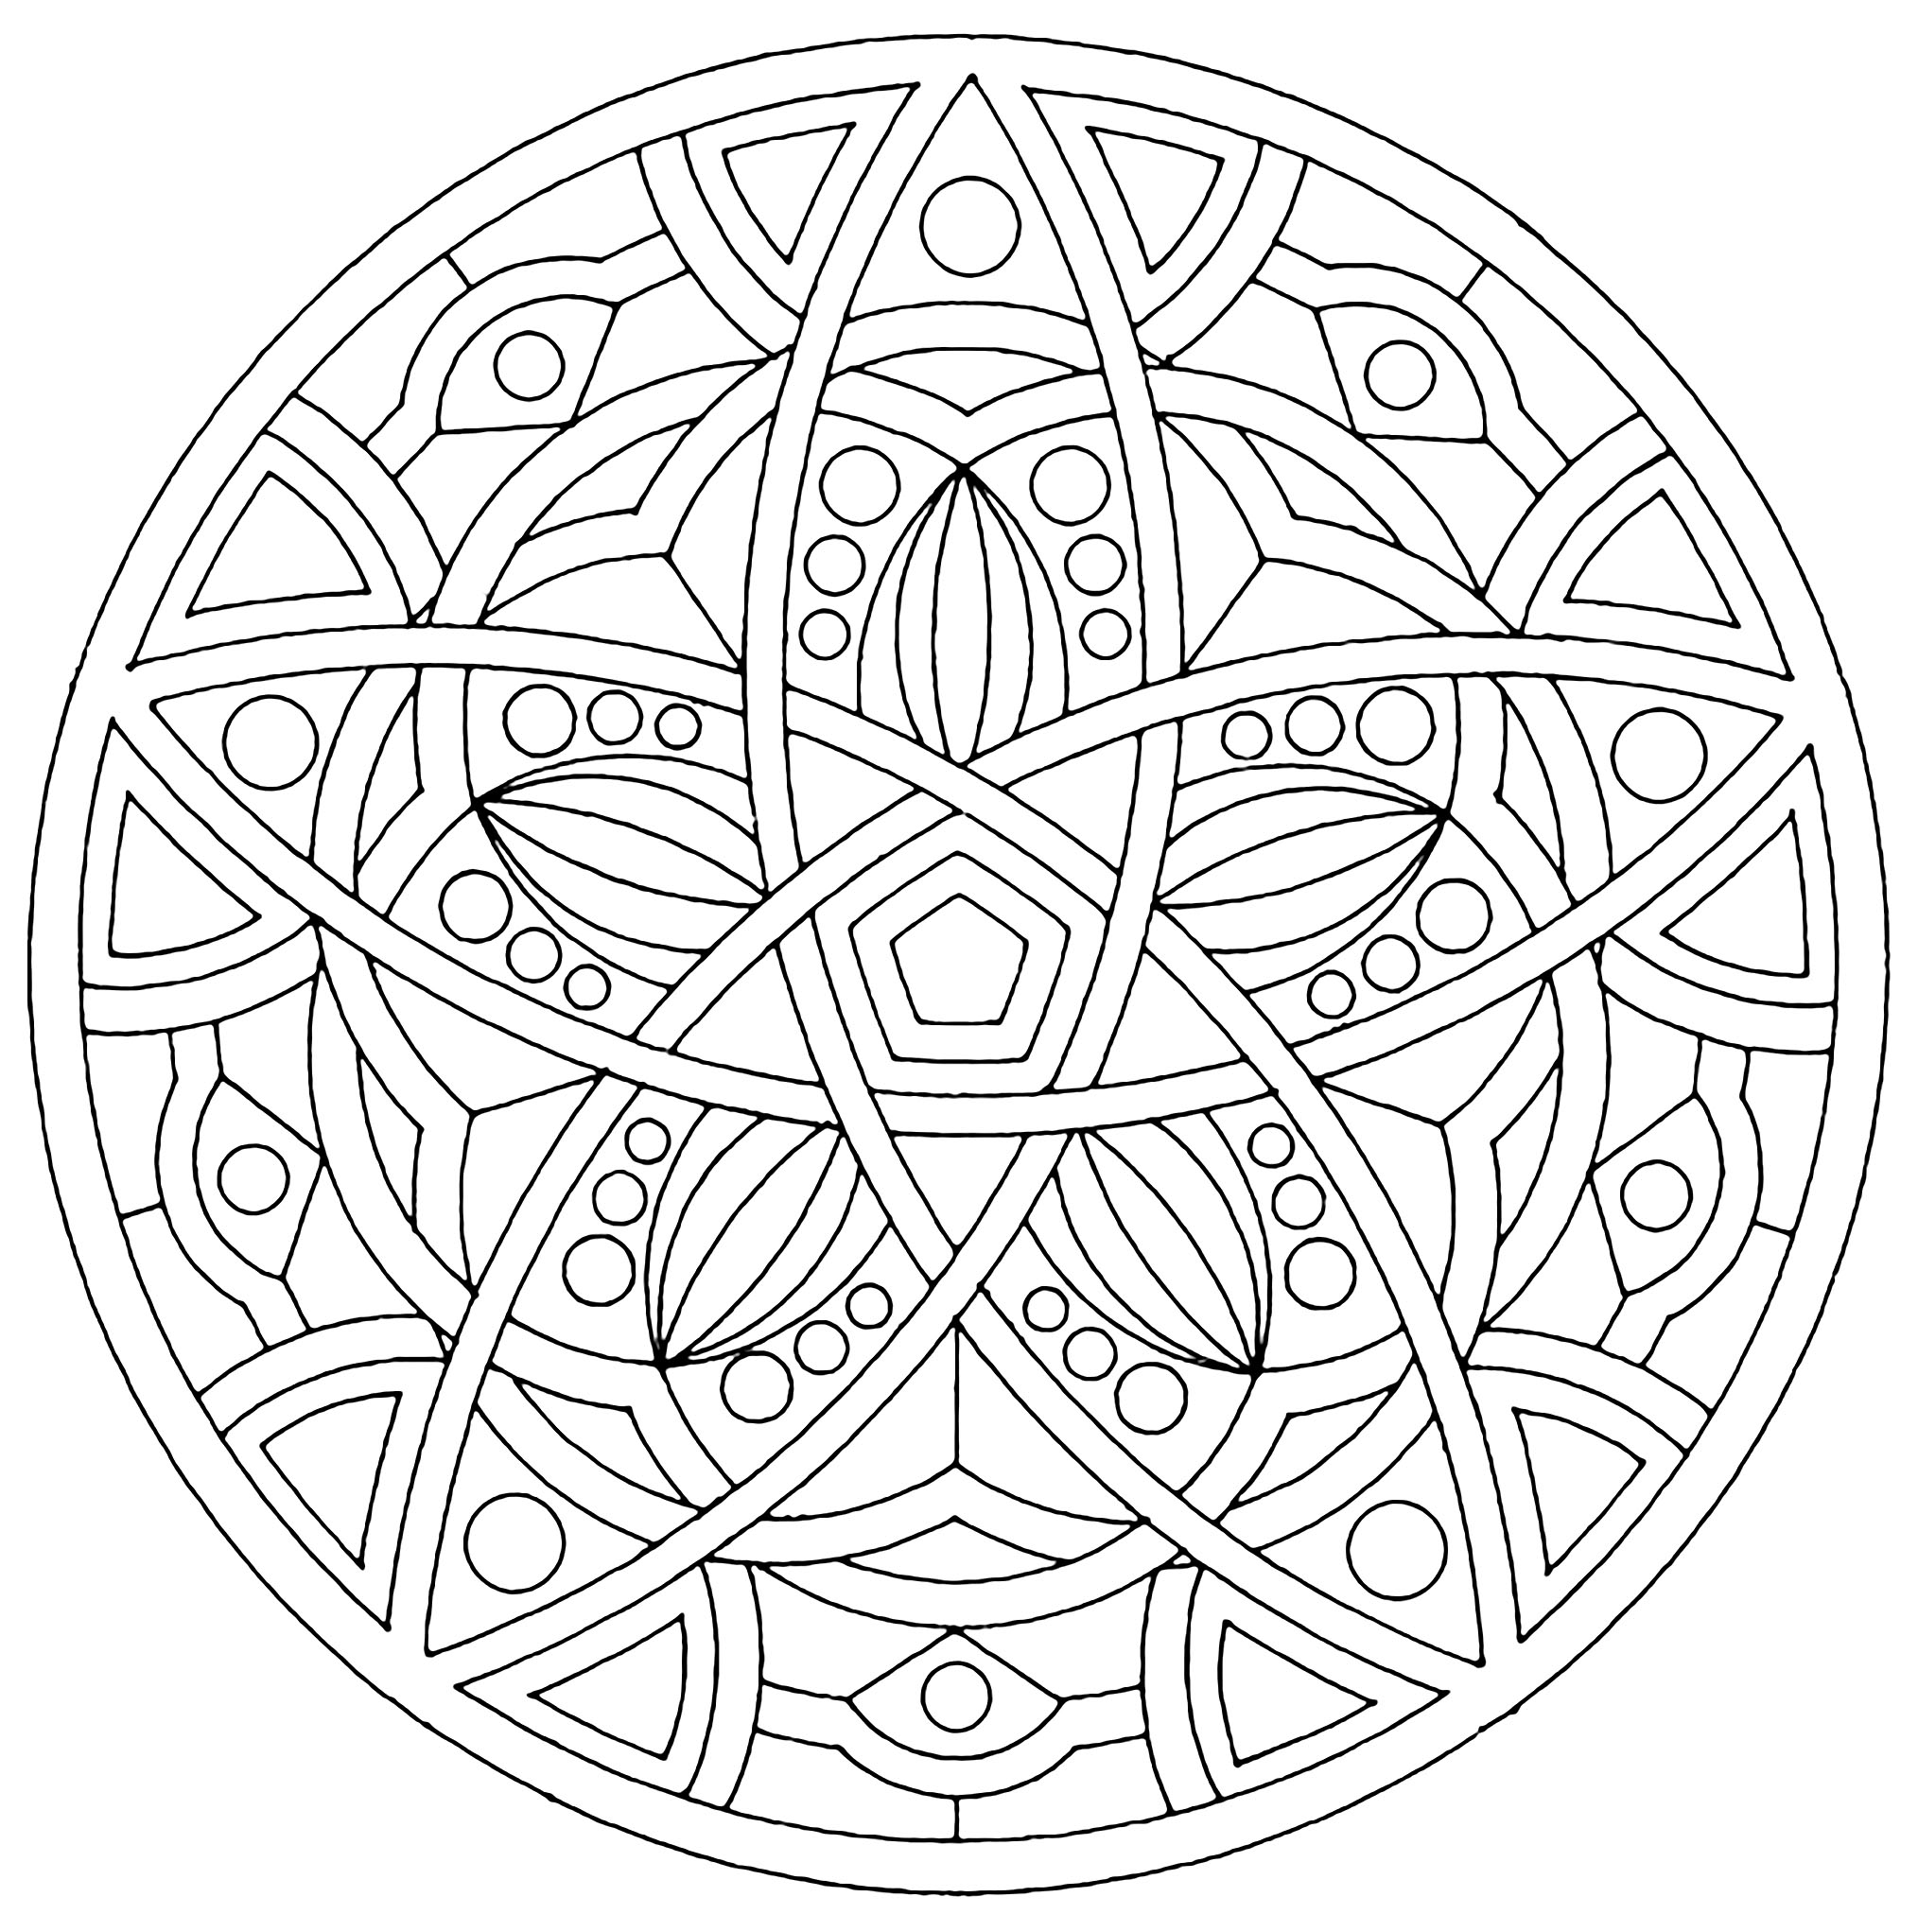 Nice harmony, for a simple Mandala coloring